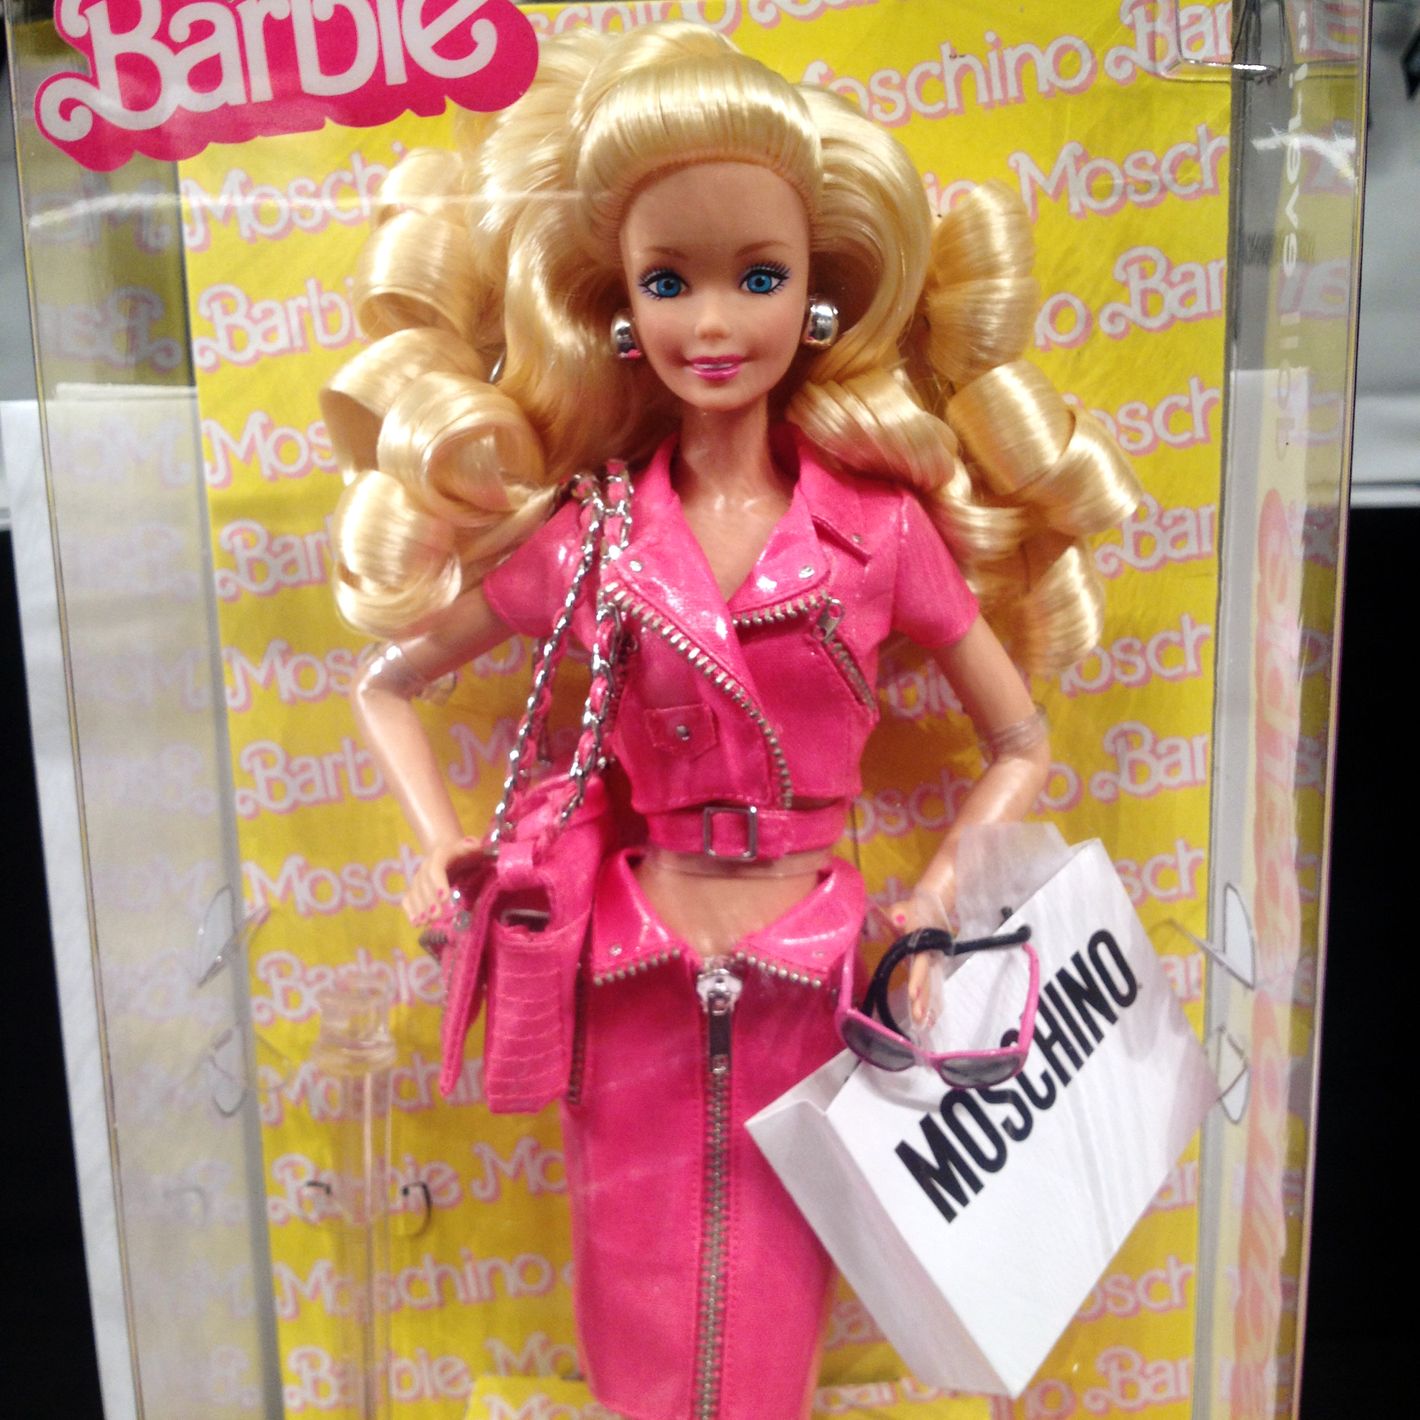 Tap into Moschino's Barbie trend with our high street picks